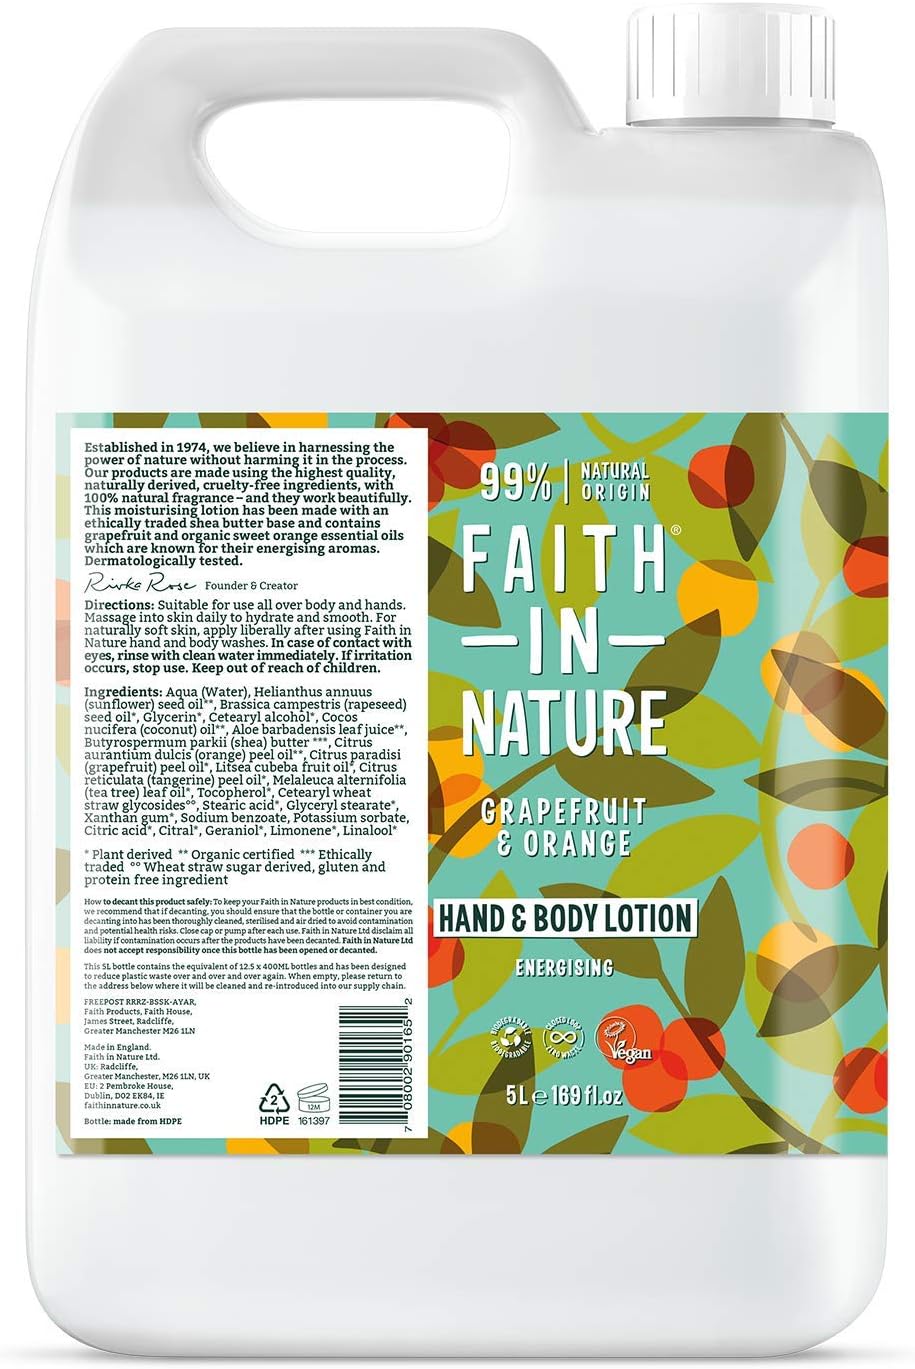 Faith In Nature - Natural Grapefruit & Orange - Hand & Body Lotion - 5Ltr